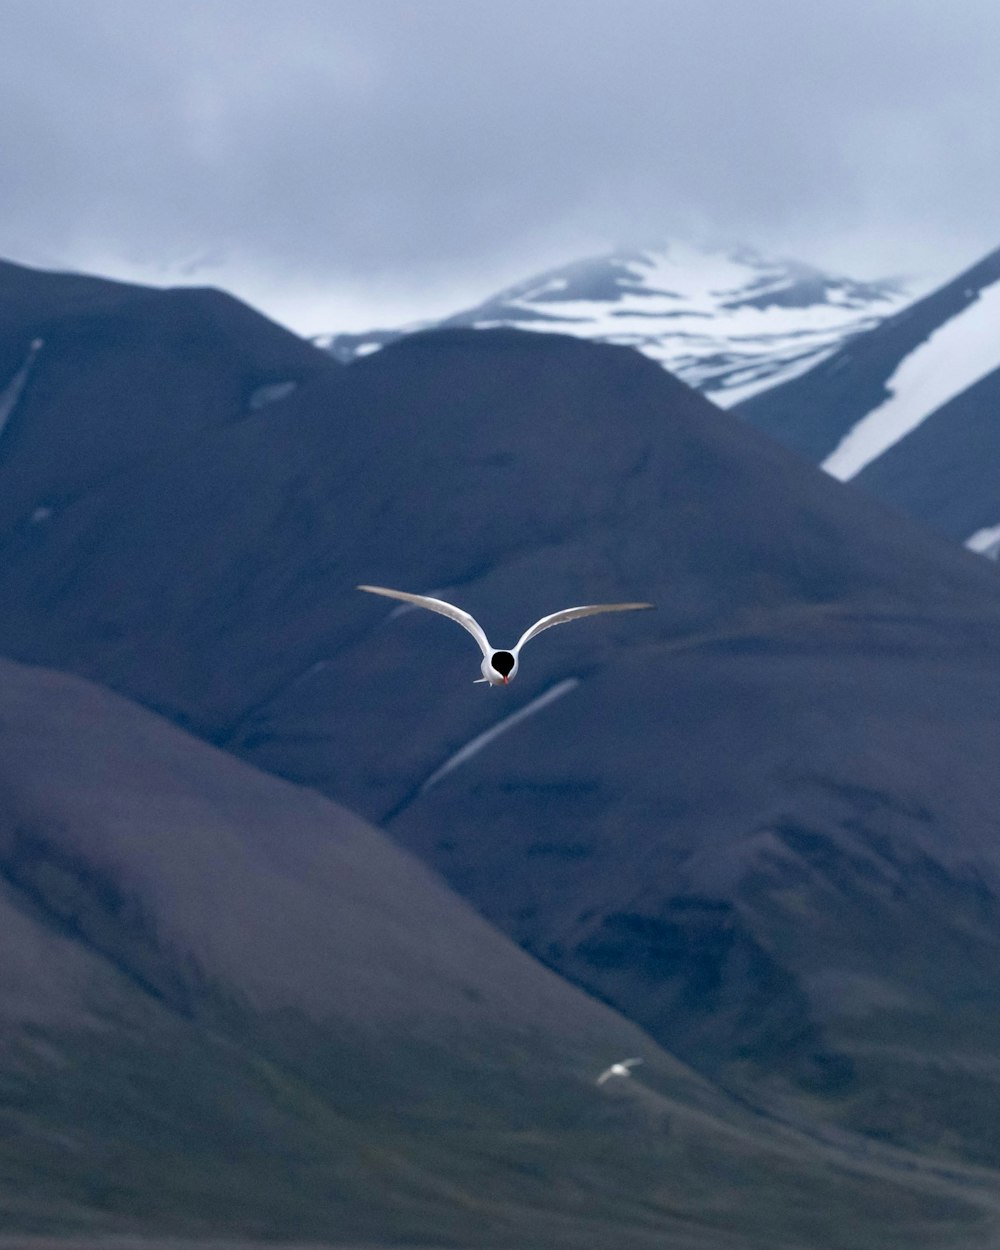 time lapse photography of bird in flight over mountains